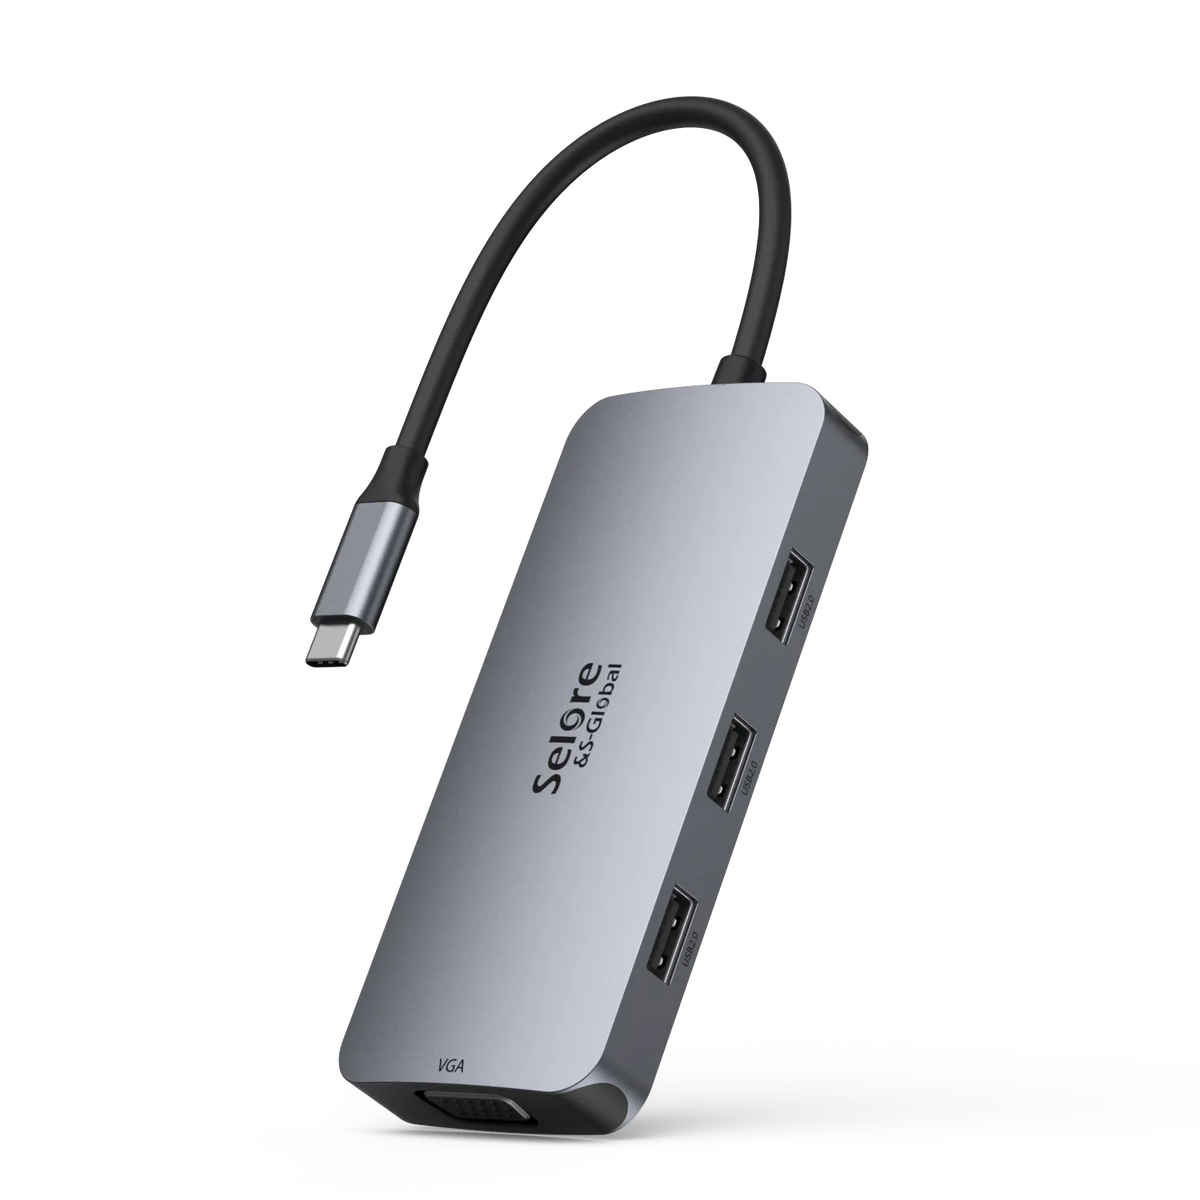 New Release] 4-Port USB 3.0 Data Hub with Individual Switches - General &  Product Discussion - Anker Community